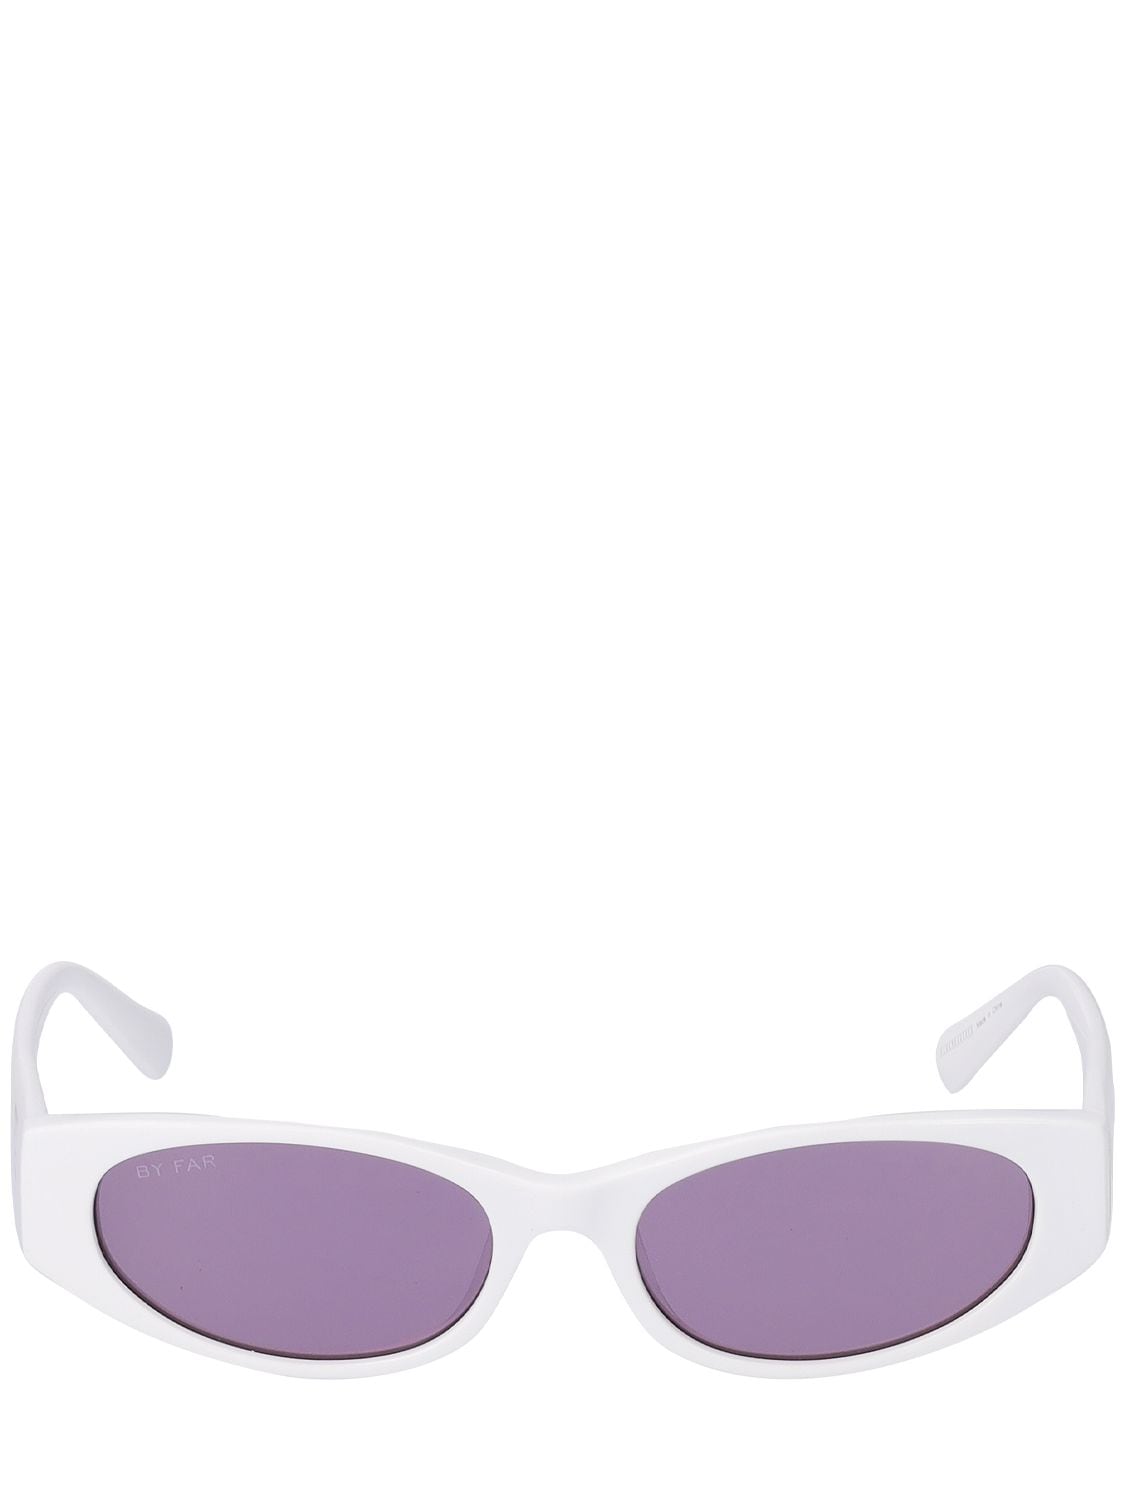 BY FAR RODEO SQUARED ACETATE SUNGLASSES